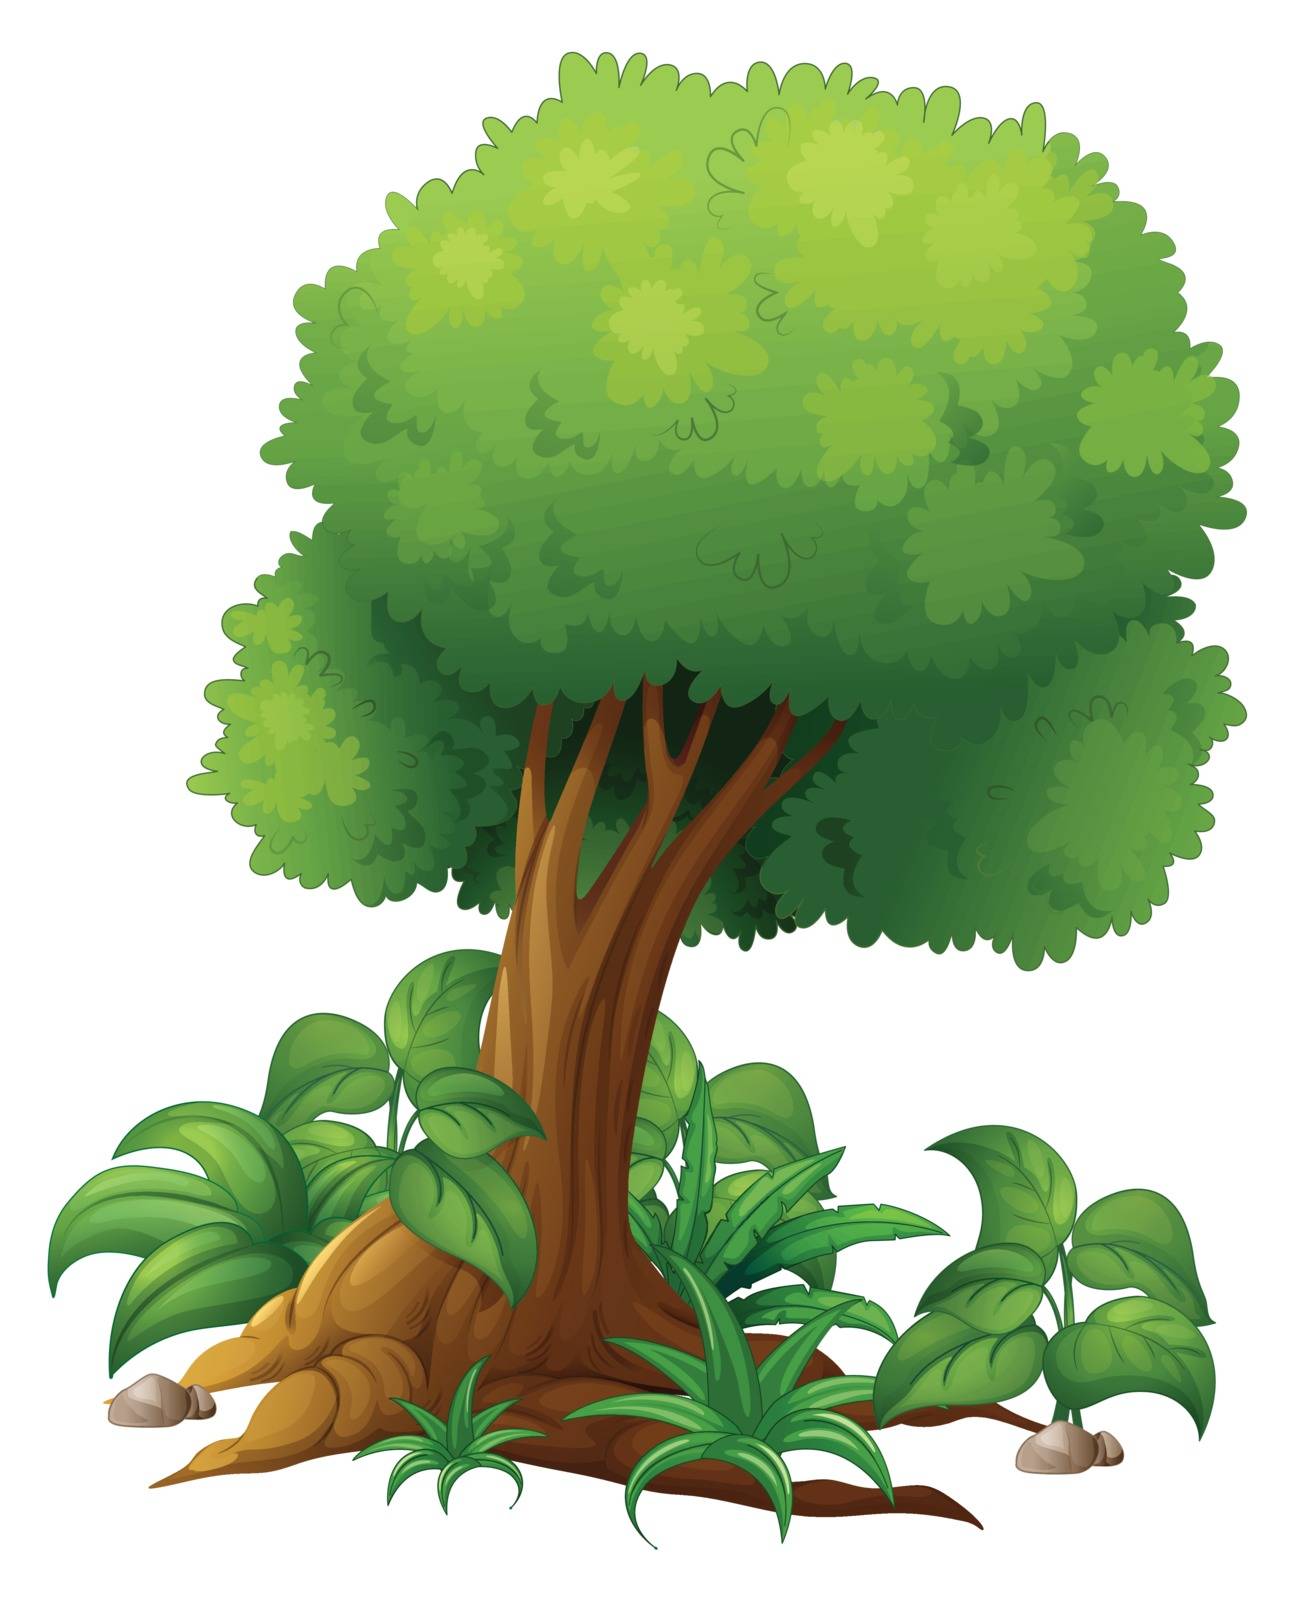 Illustration of a big tree on a white background